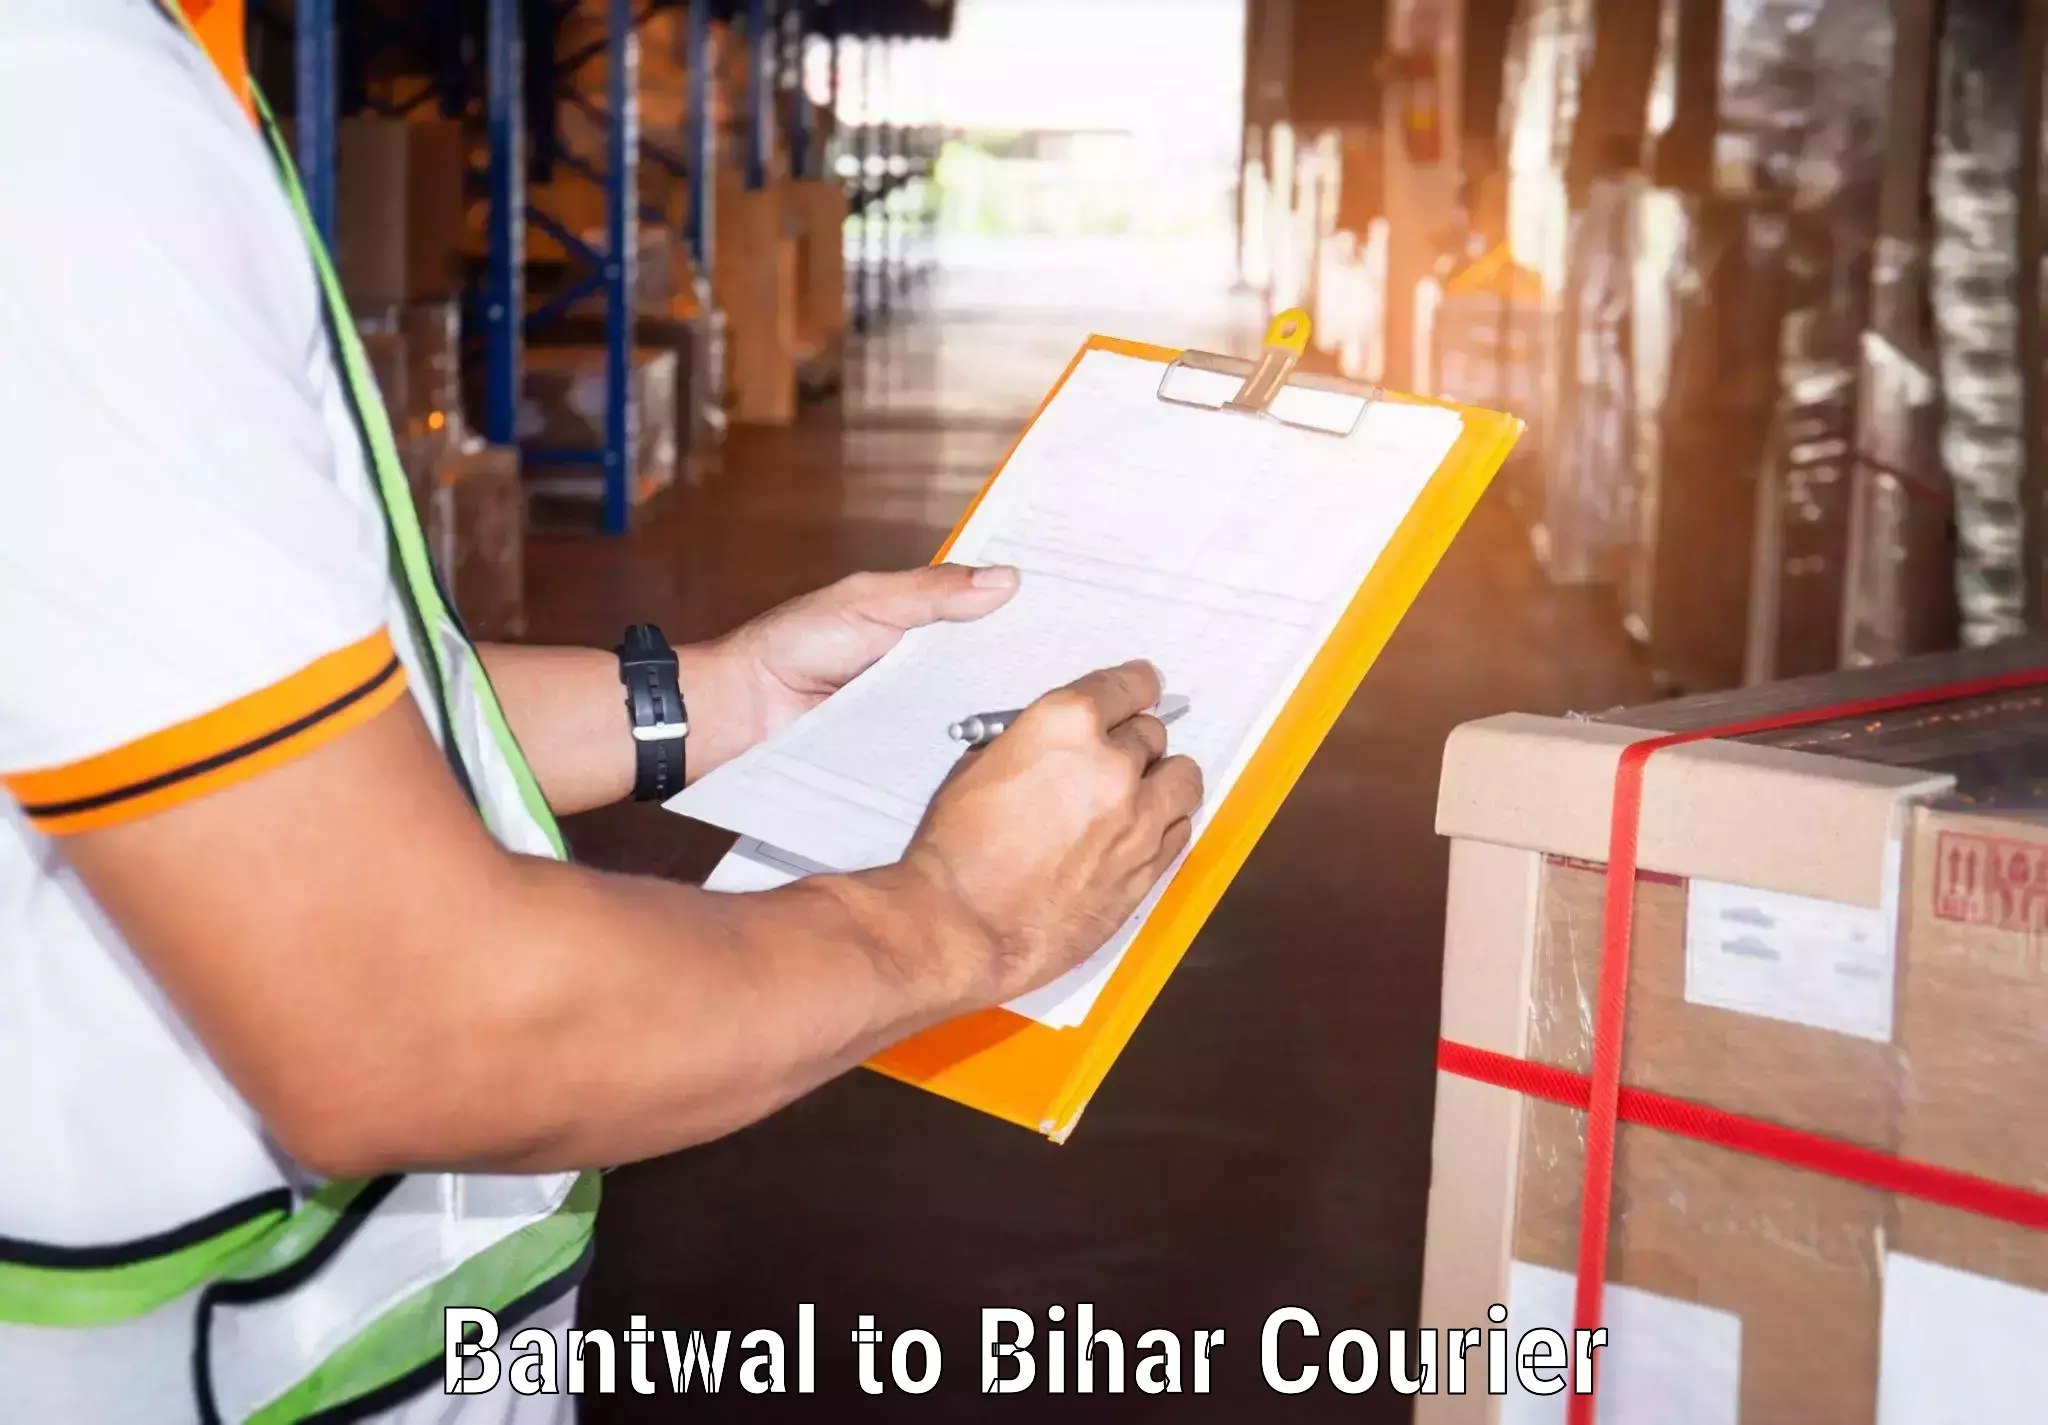 Automated parcel services Bantwal to Piro